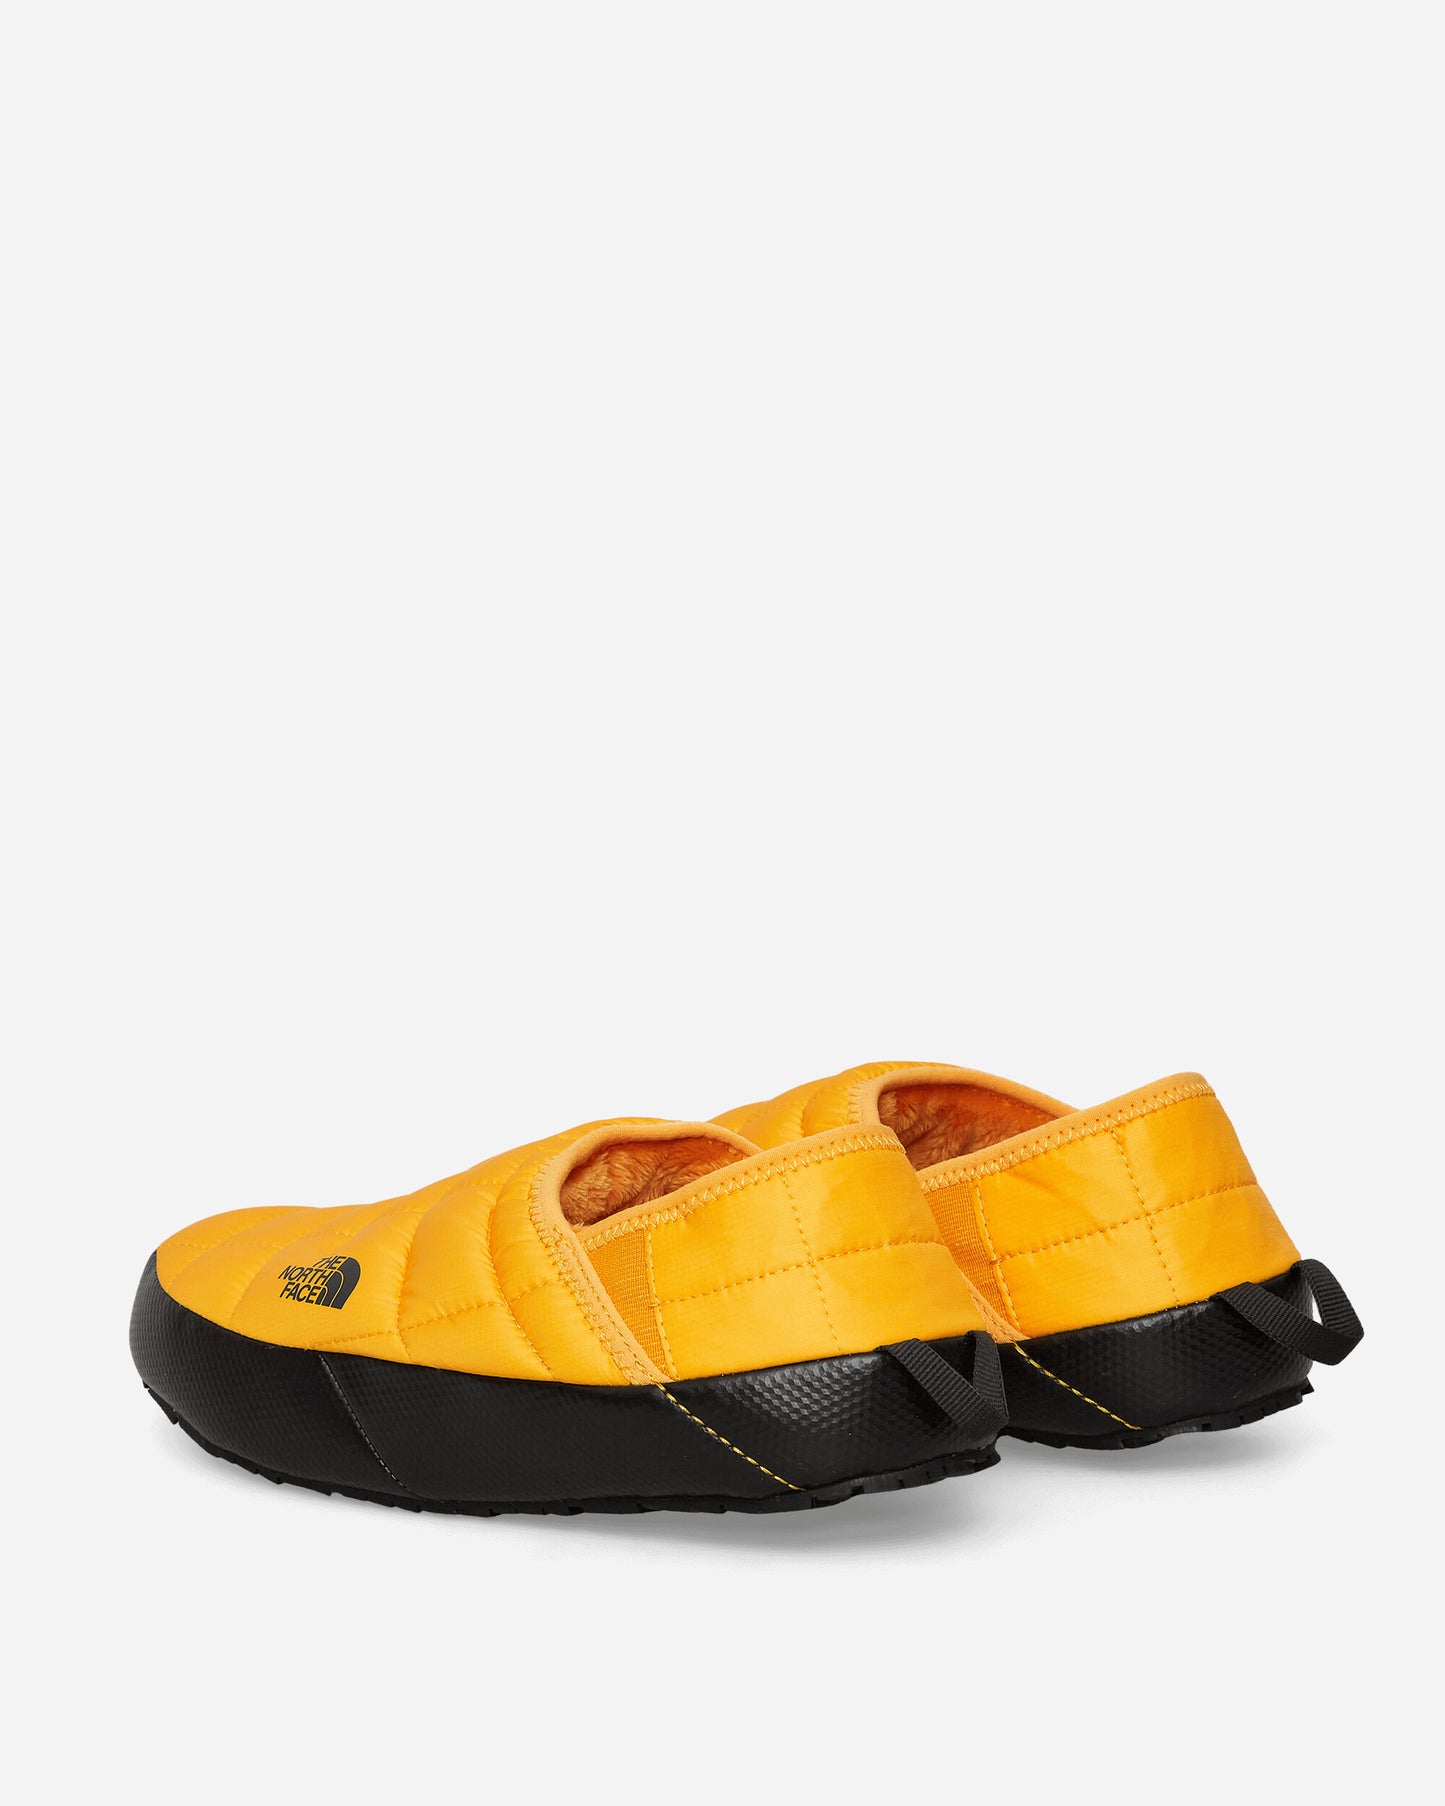 The North Face Men’S Thermoballtm Traction Mule V Summit Gold/Tnf Black Sandals and Slides Sandals and Mules NF0A3UZN ZU31